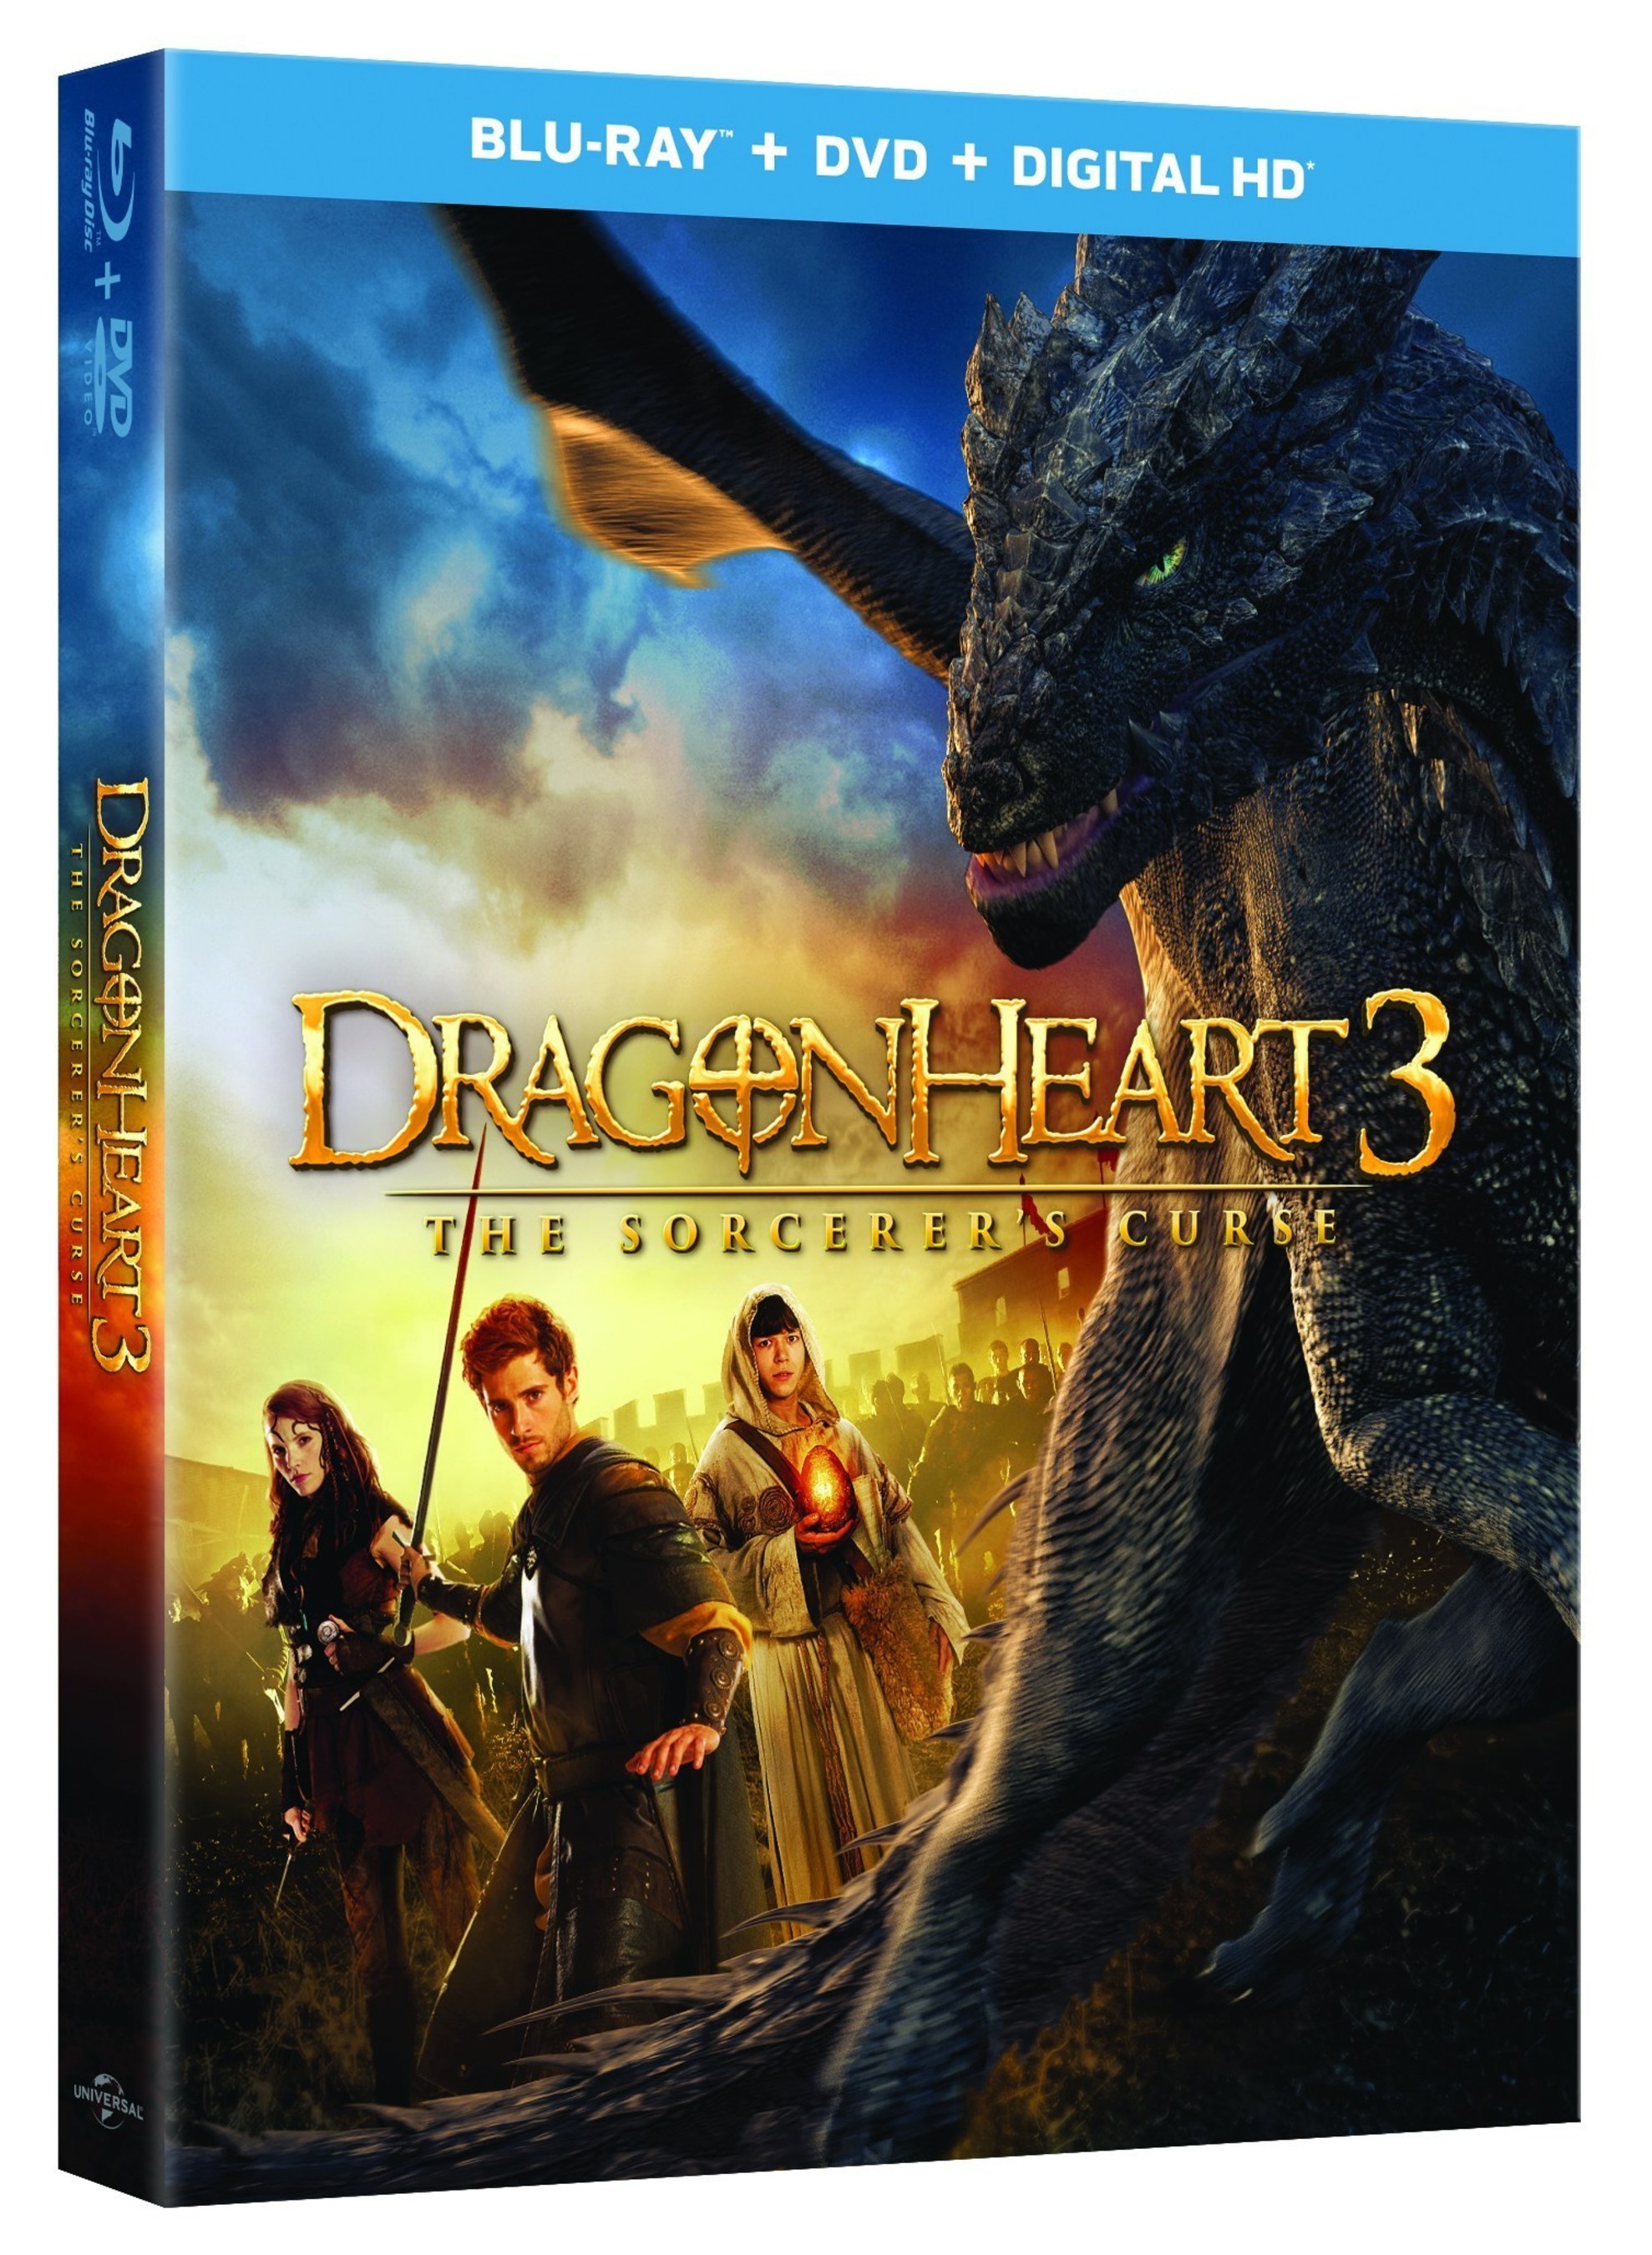 Universal Pictures Home Entertainment: Dragonheart 3: The Sorcerer's Curse